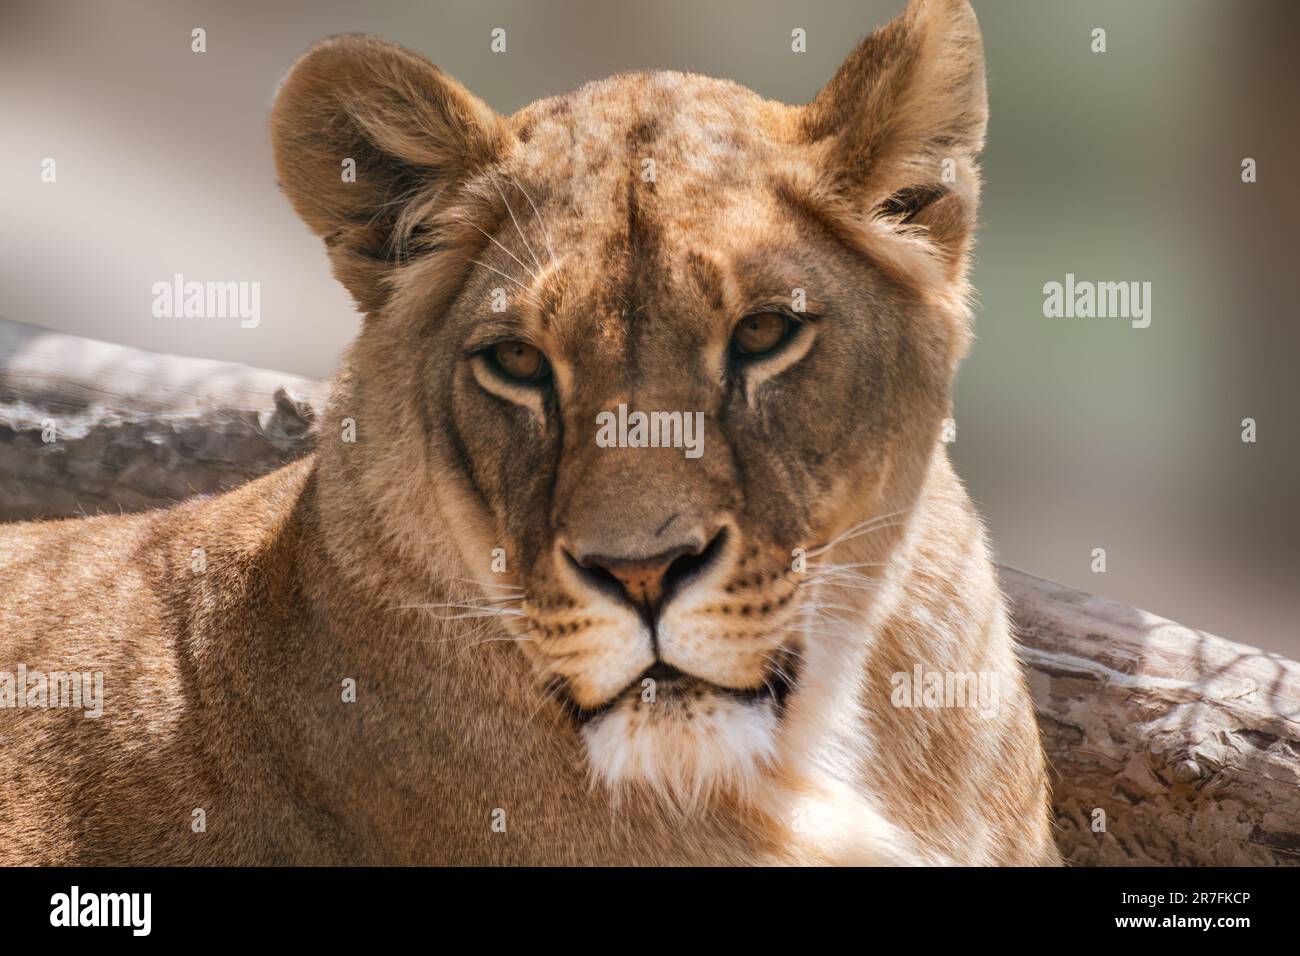 Lion female calm face, lionesses portrait, close-up with blurred background. Wild animals, big cat Stock Photo